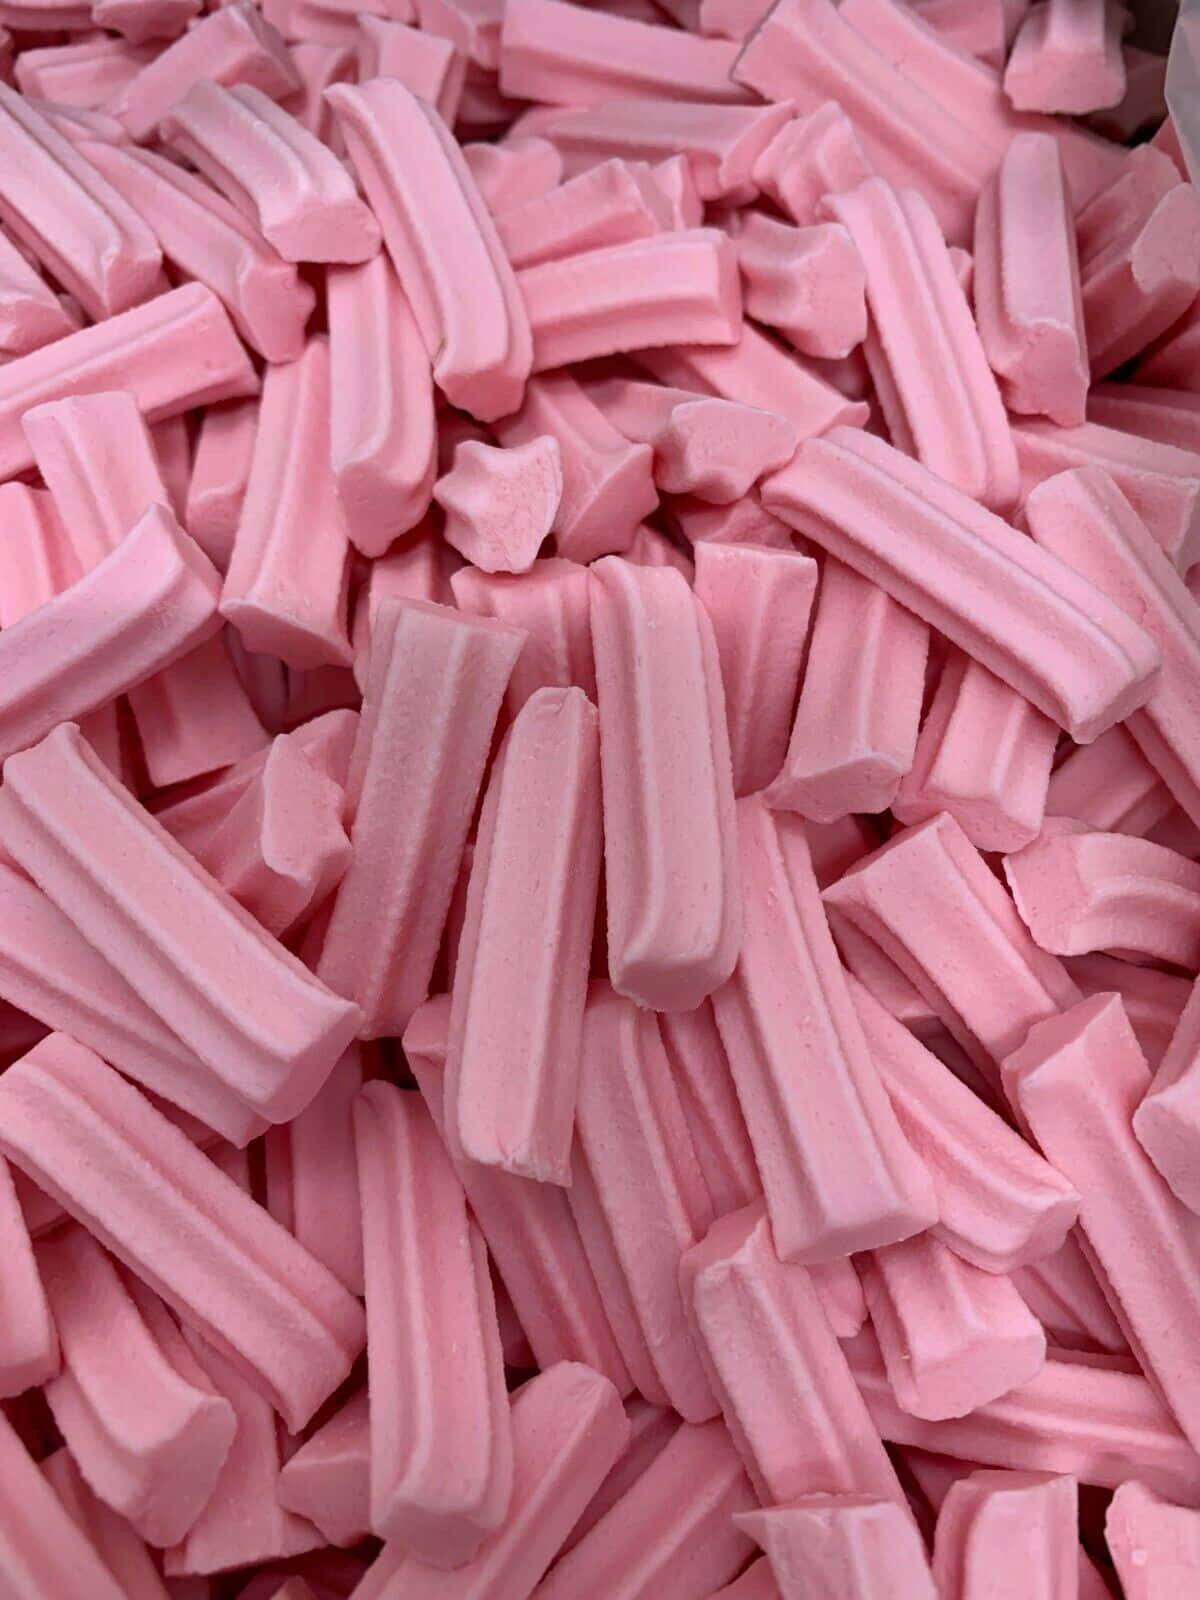 Delicious Swirl of Pink Candy Wallpaper